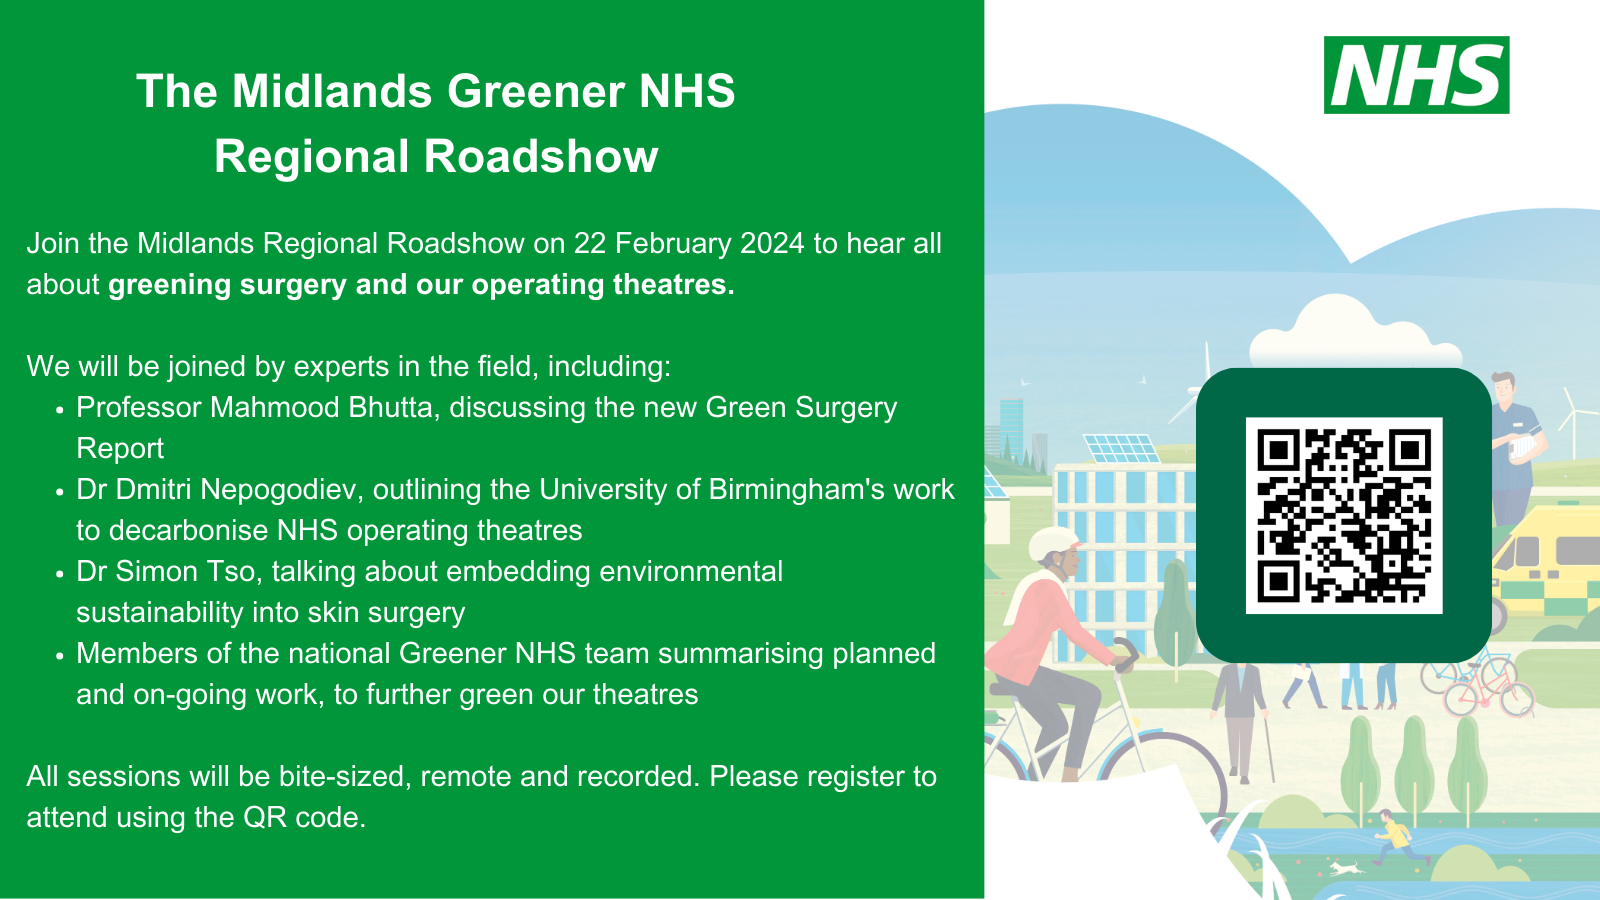 Electronic flier about the Midlands Greener NHS Regional Roadshow on Sustainable Surgery and Operating Theatres